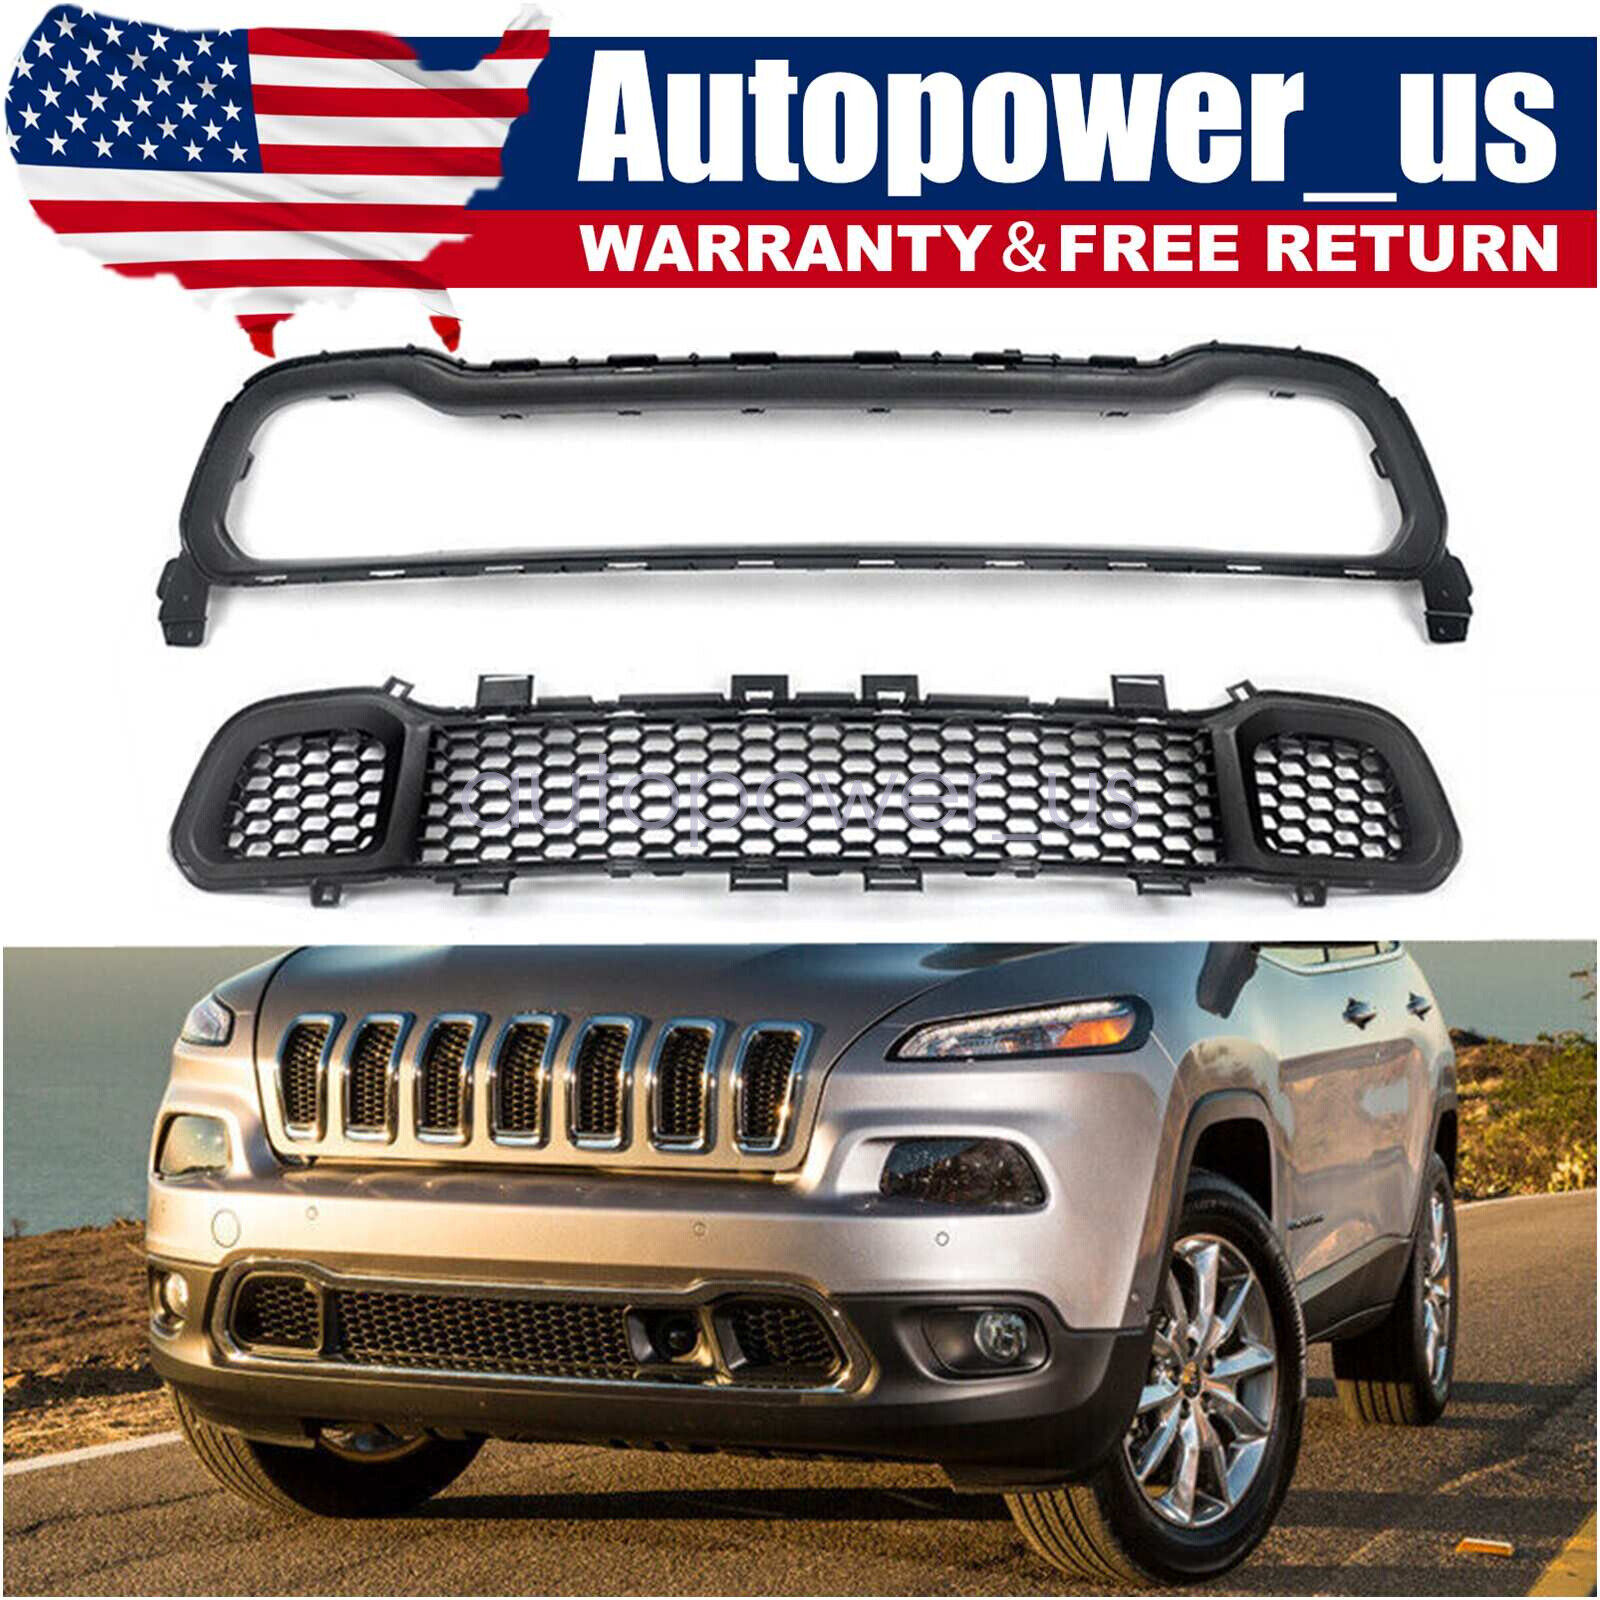 2014-2018 Front Lower Bumper Cover Grille + Molding Trim Black For Jeep Cherokee